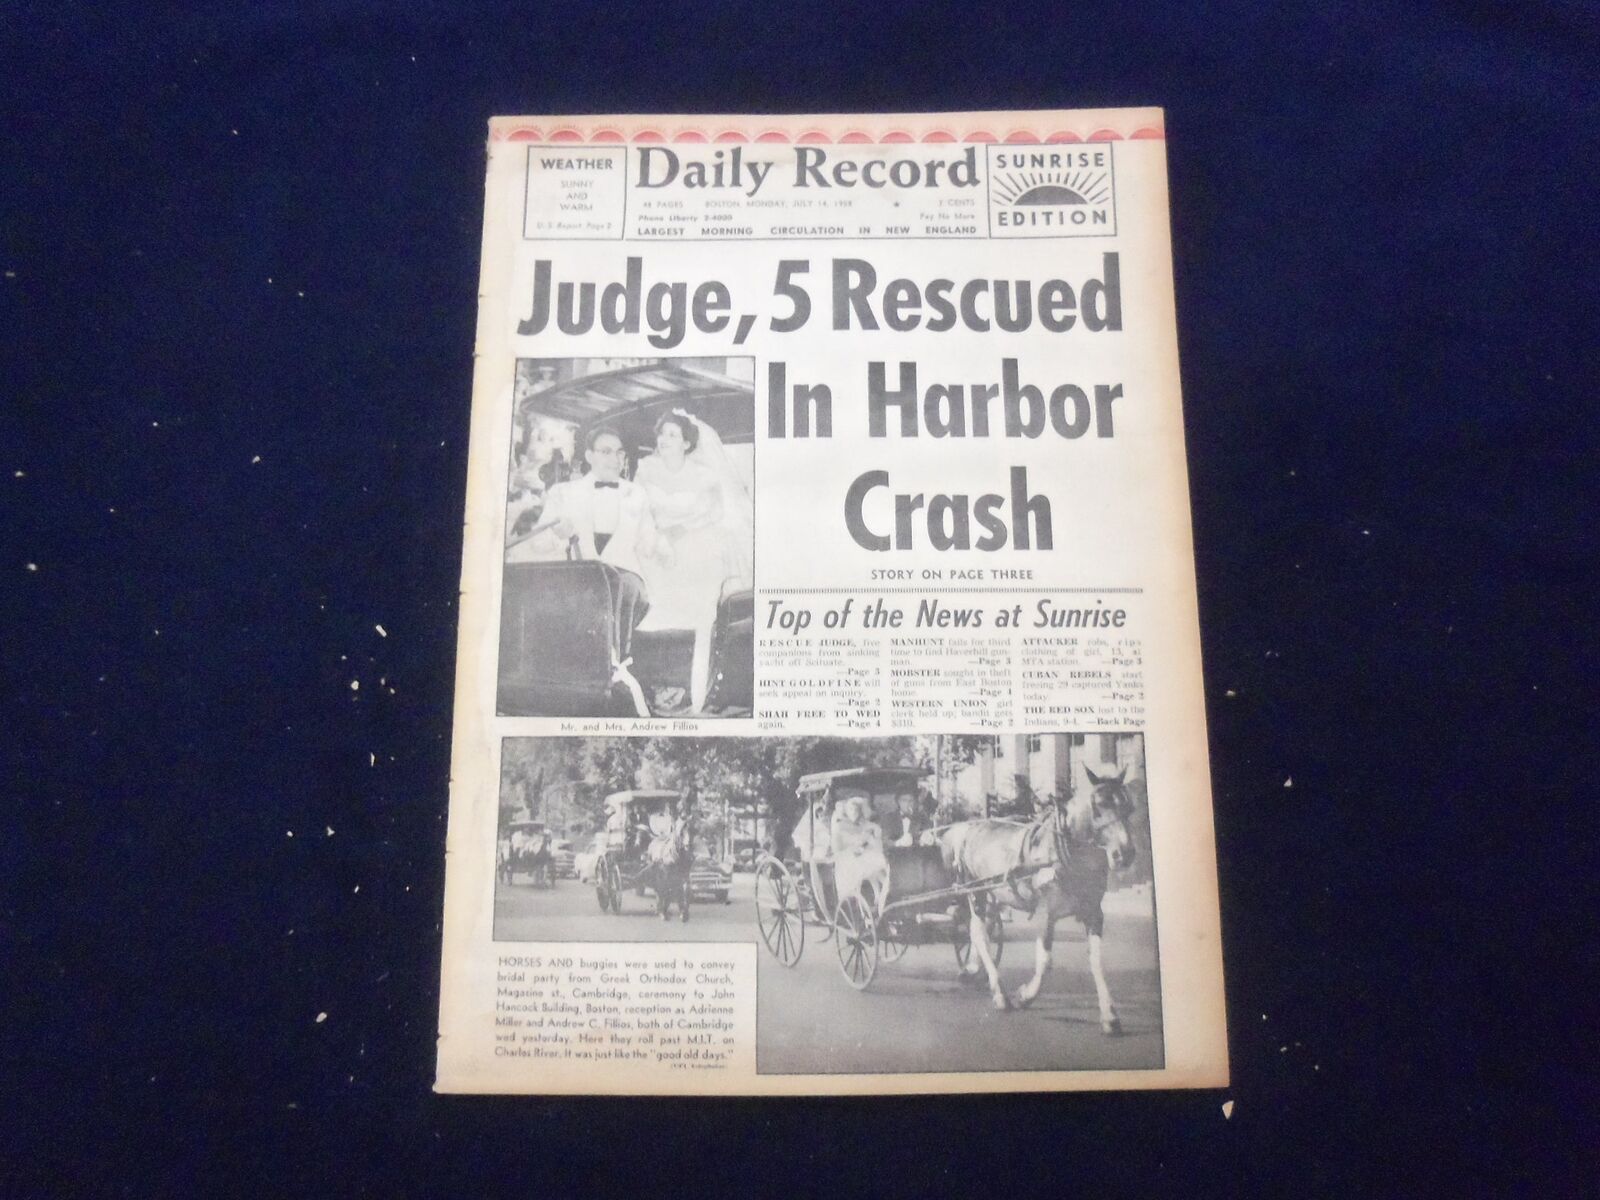 1958 JULY 14 BOSTON DAILY RECORD NEWSPAPER - 5 RESCUED IN HARBOR CRASH - NP 6355